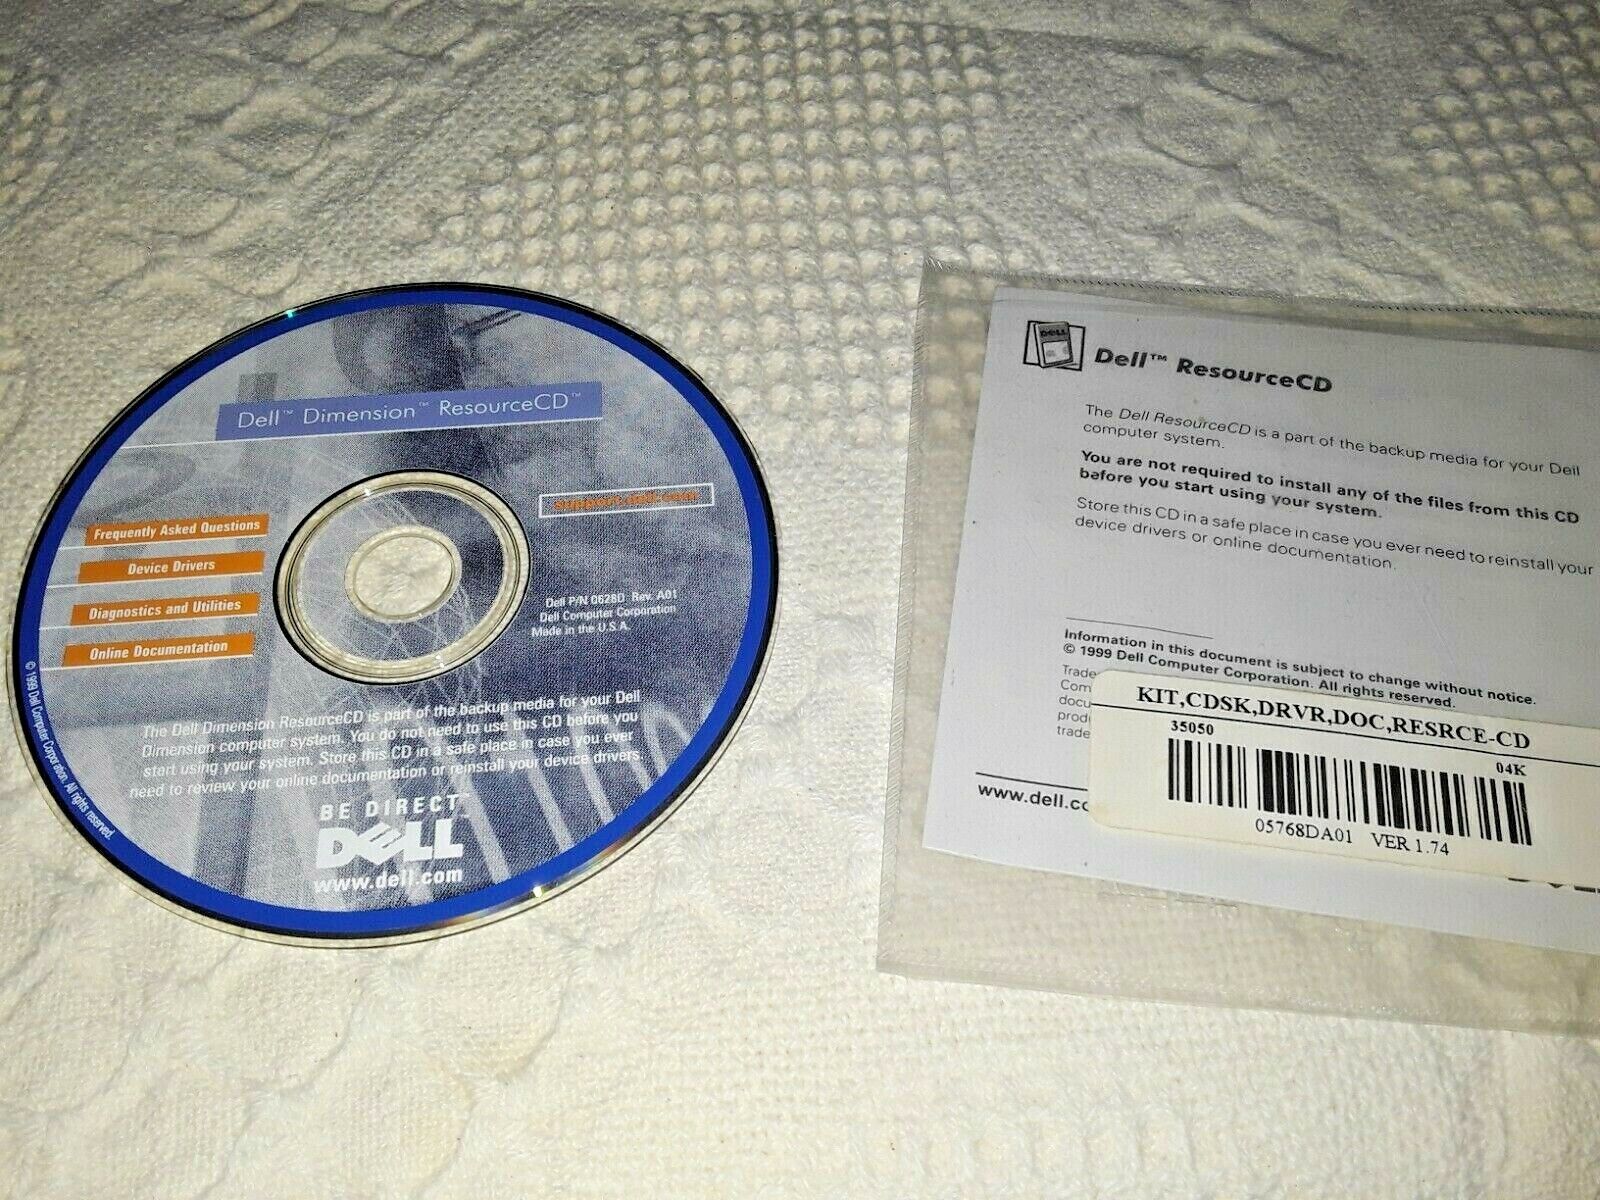 Dell Dimension Resource CD Ver.1.74 P/N 0628D with original case & instructions